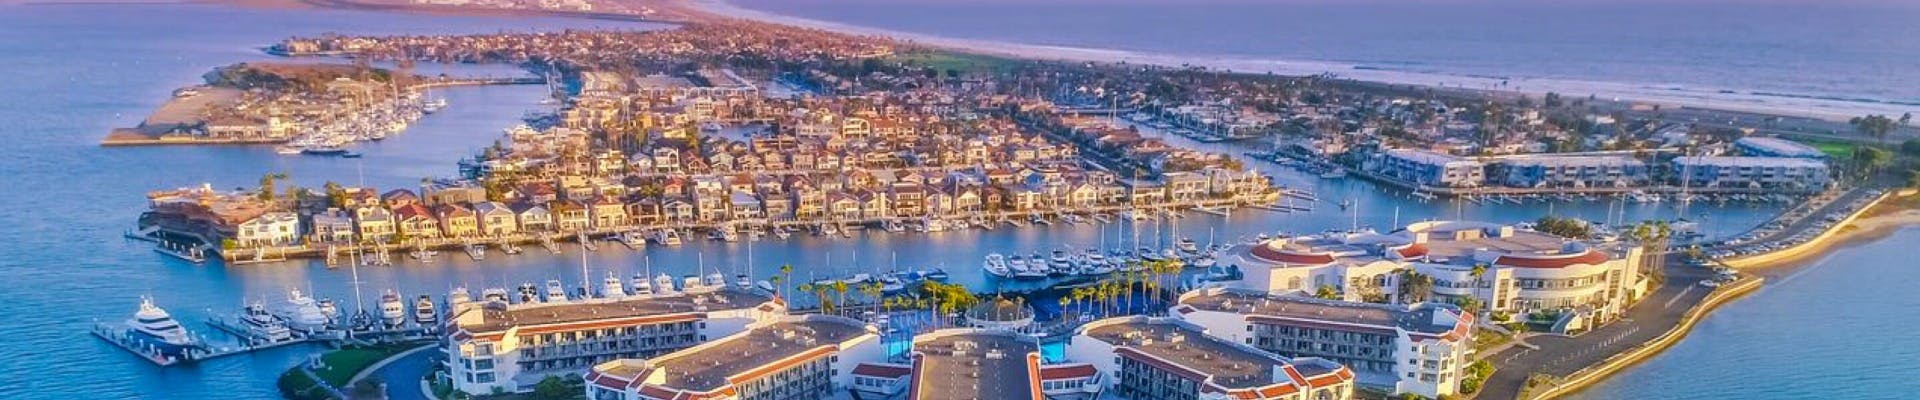 Yachting in San Diego, CA